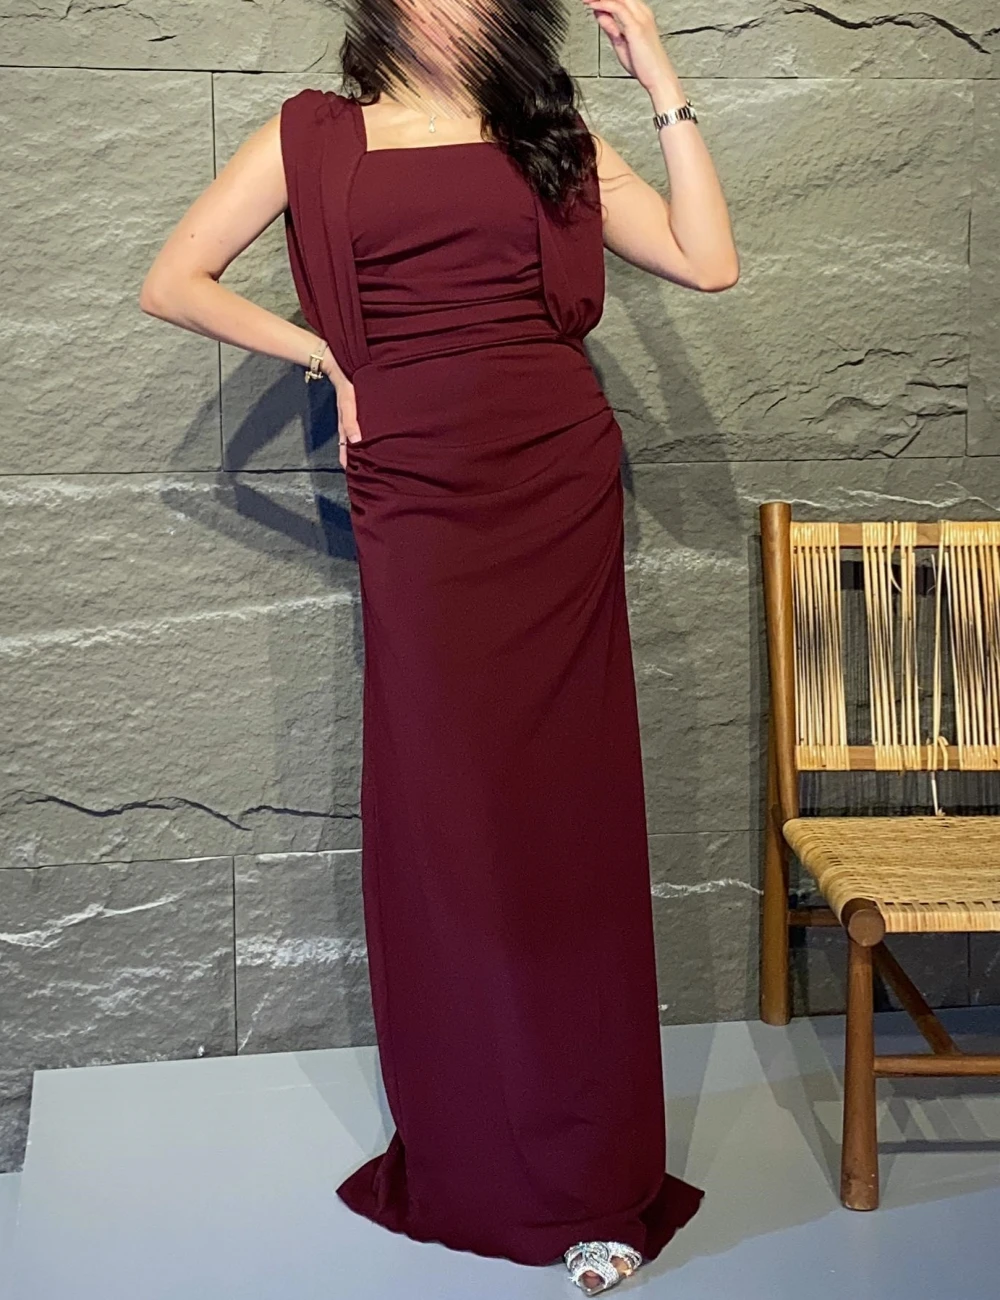 

Sizes Available Jersey Pleat Straight Square Neck Long Dresses Homecoming Formal Casual Simple Retro Fashion Elegant